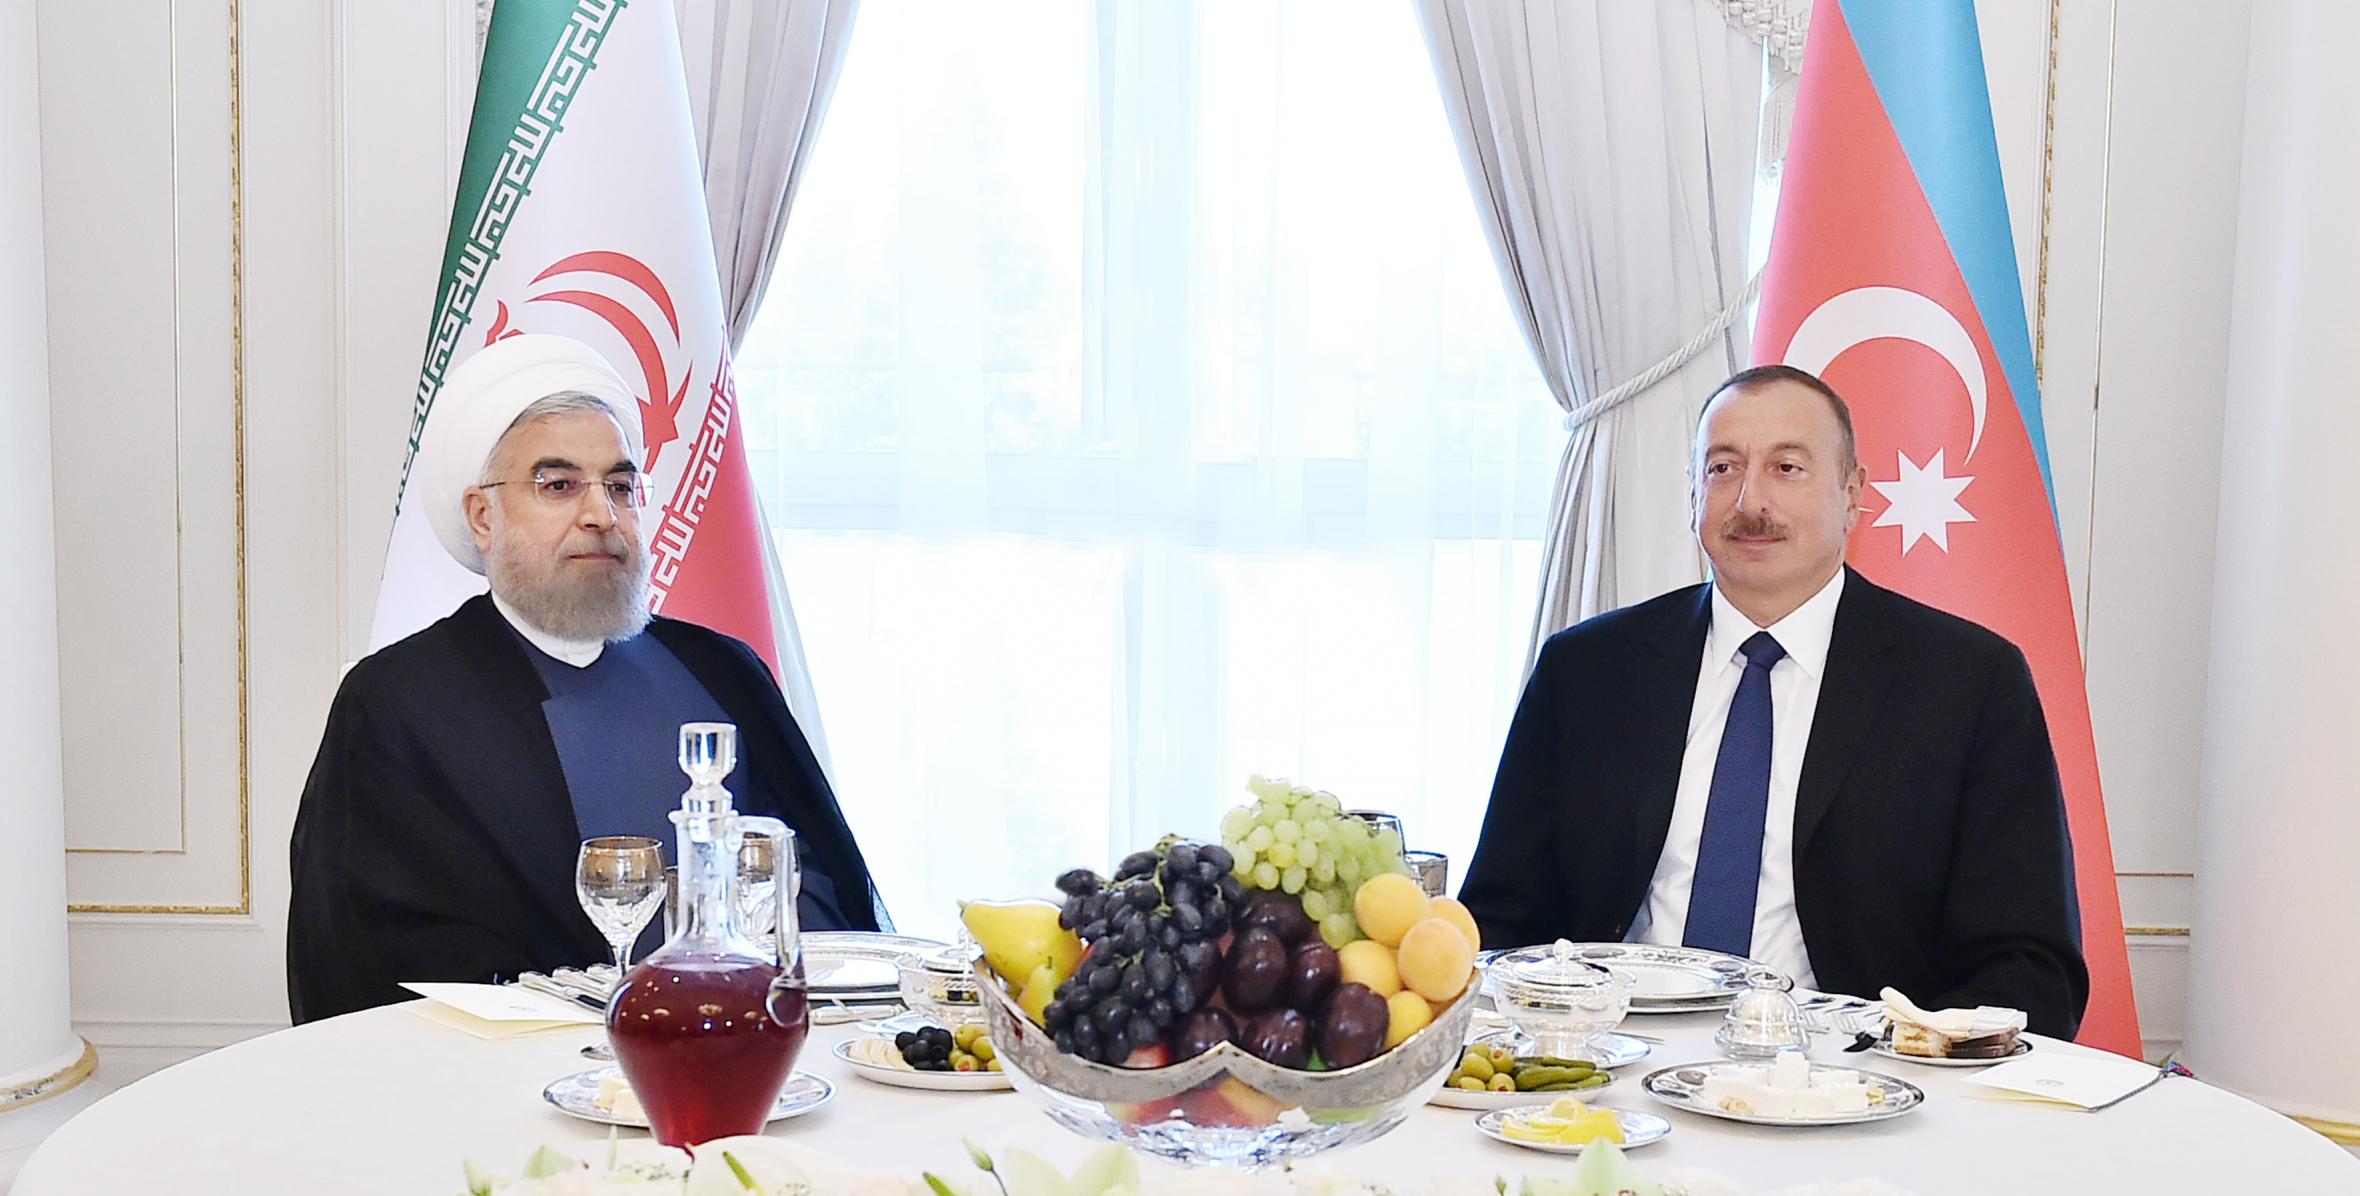 Dinner reception was hosted on behalf of Ilham Aliyev in honor of Iranian President